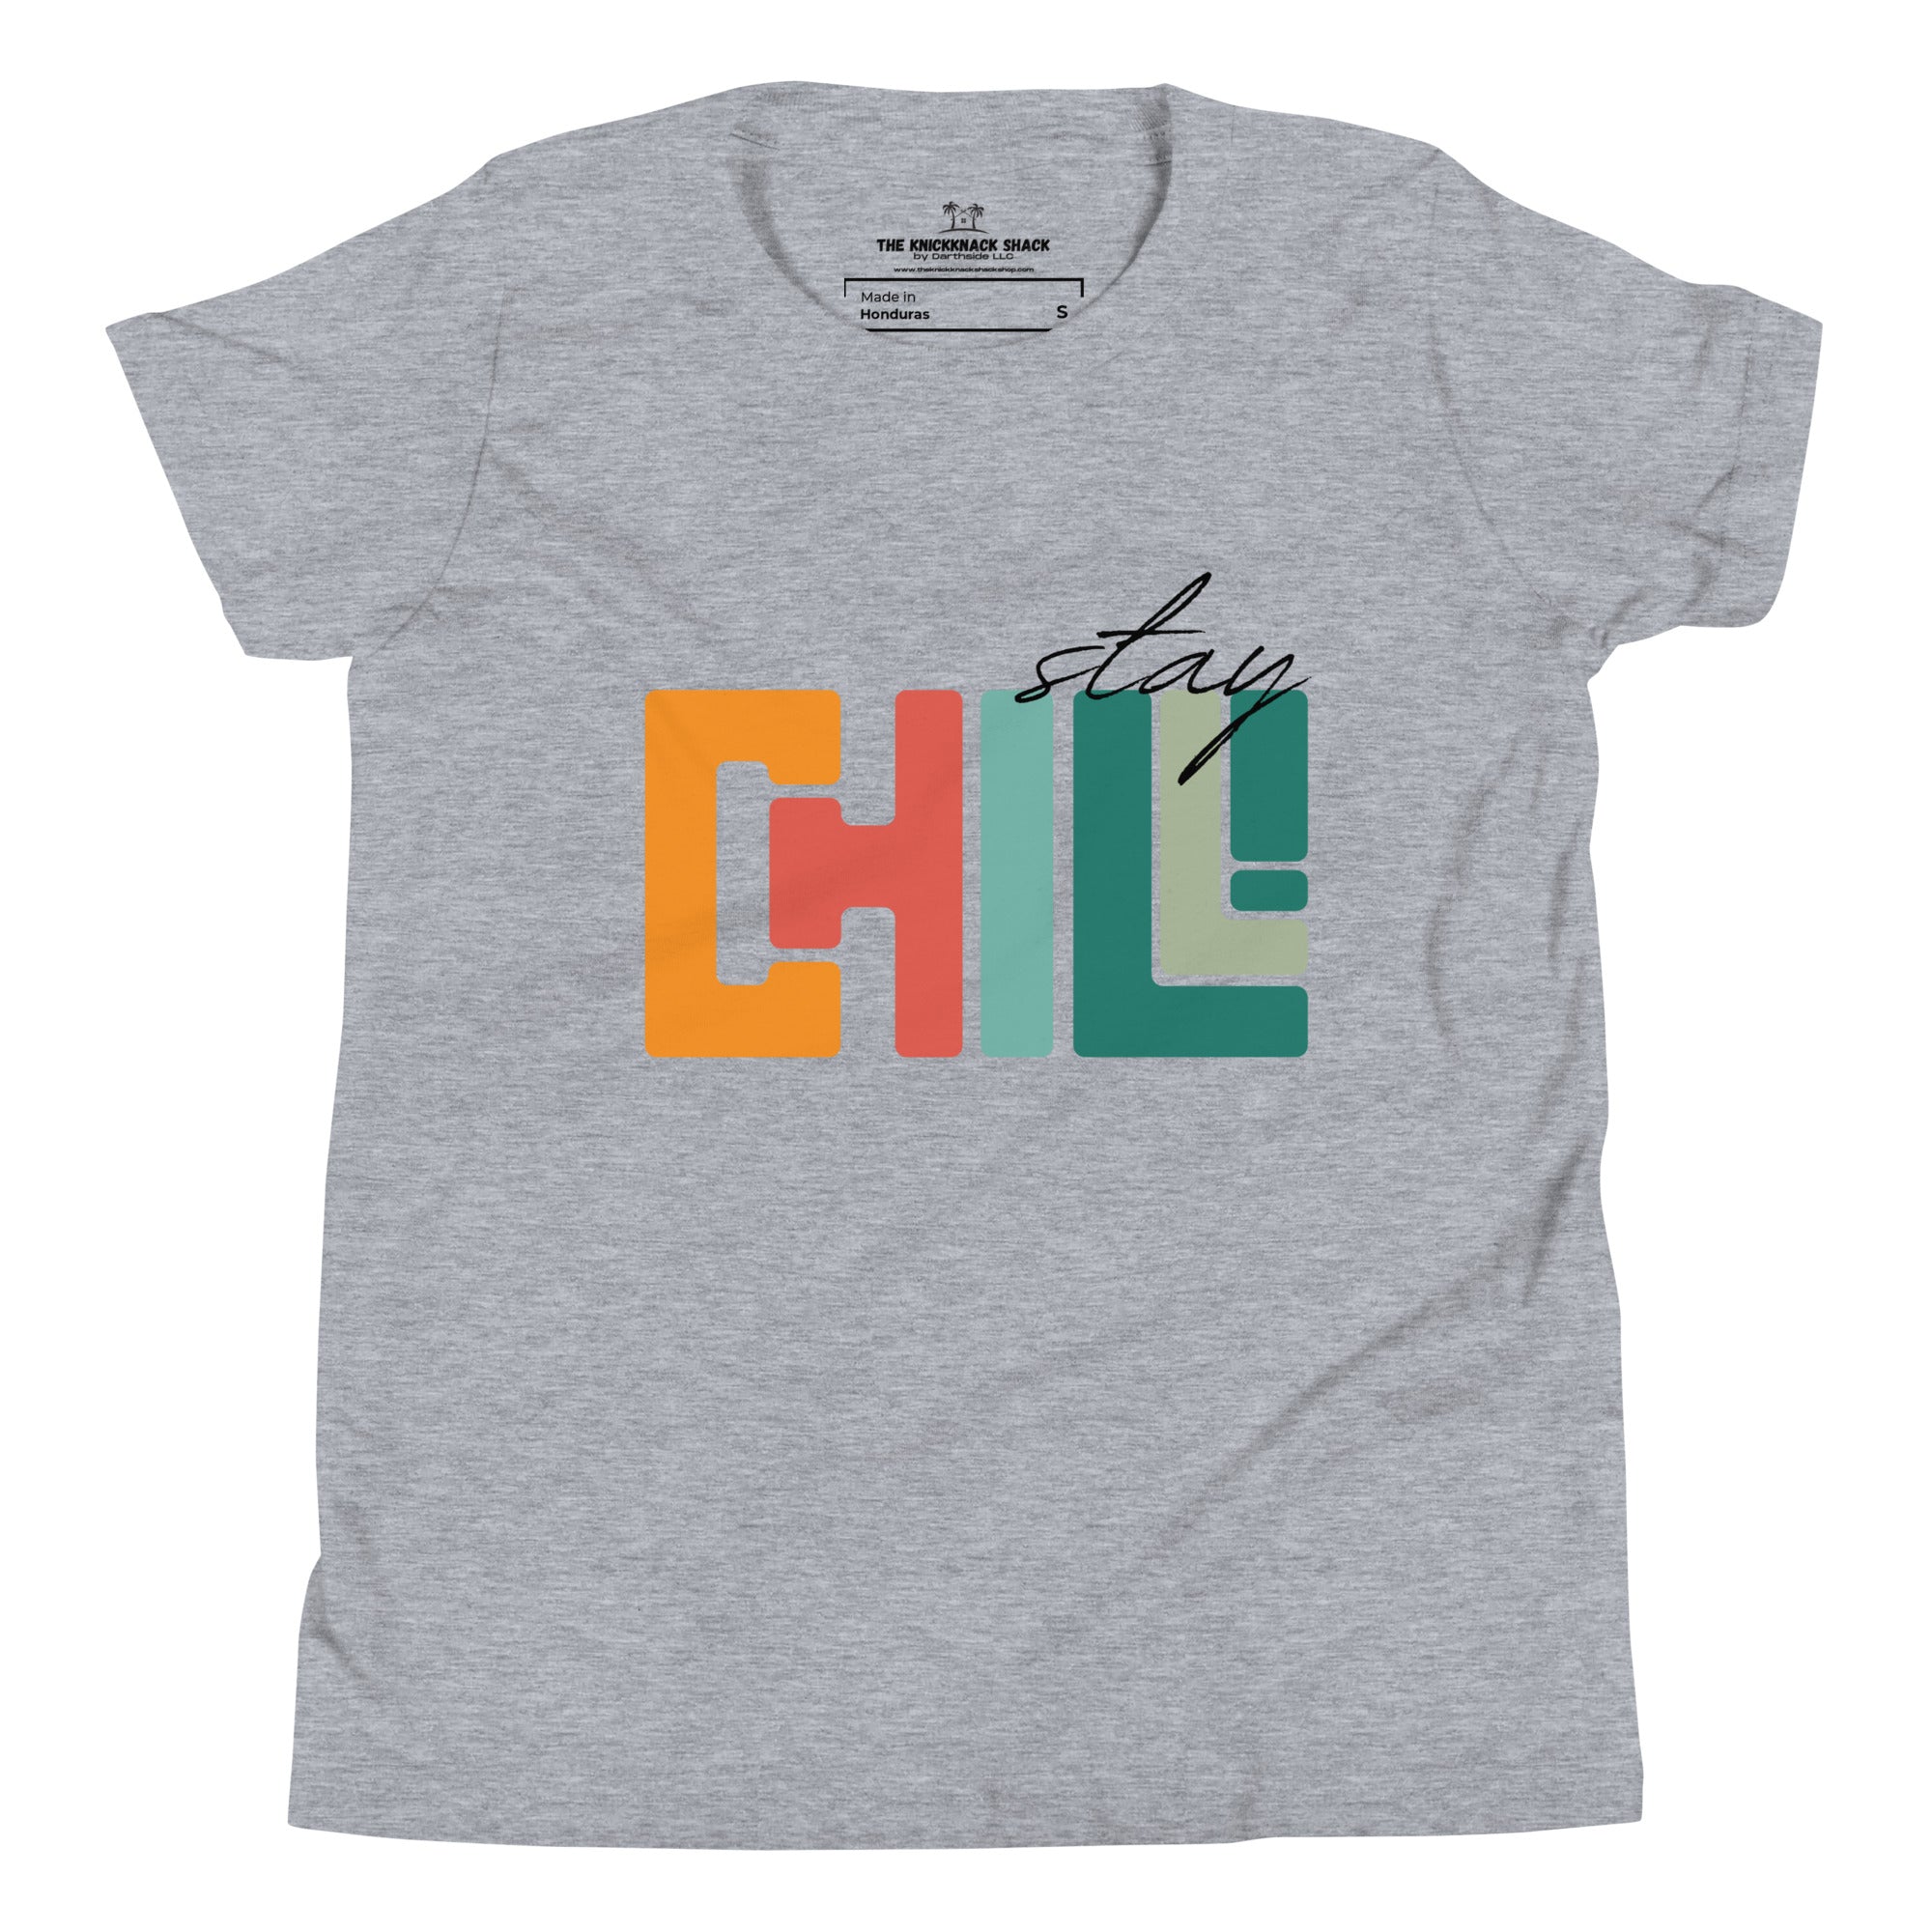 T-shirt jeunesse - Stay Chill (couleurs claires)